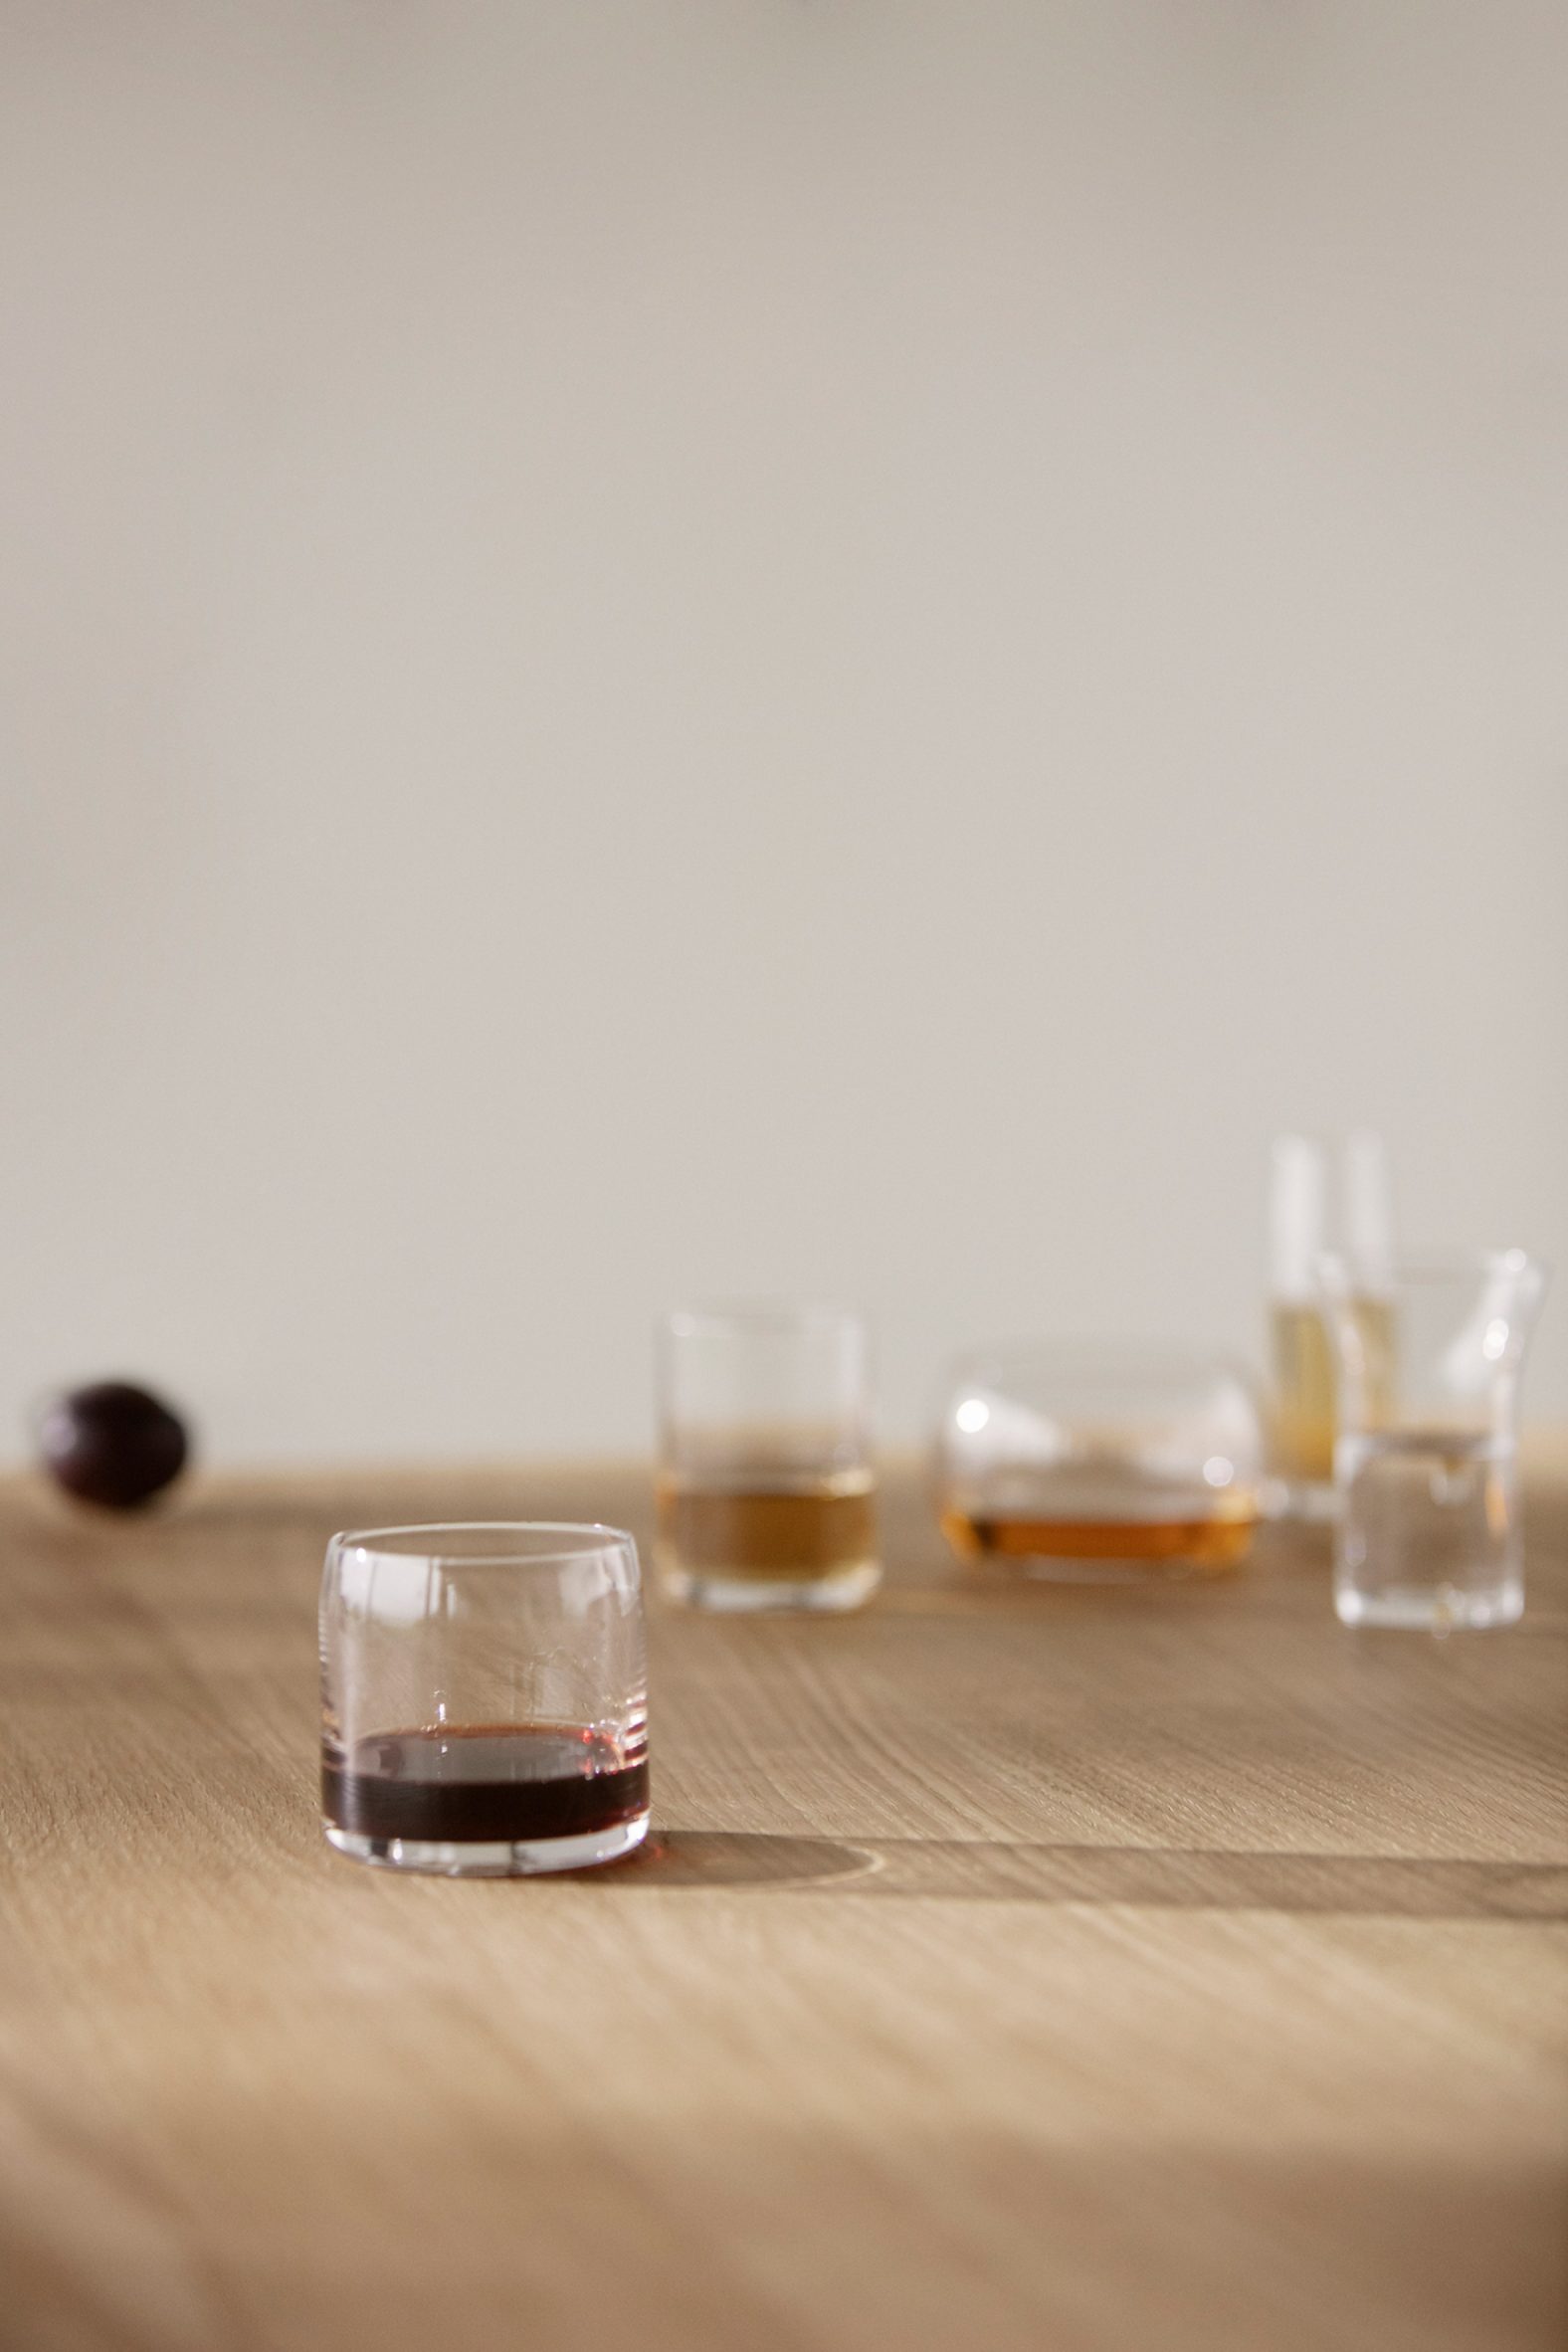 Photograph of glasses on wooden table